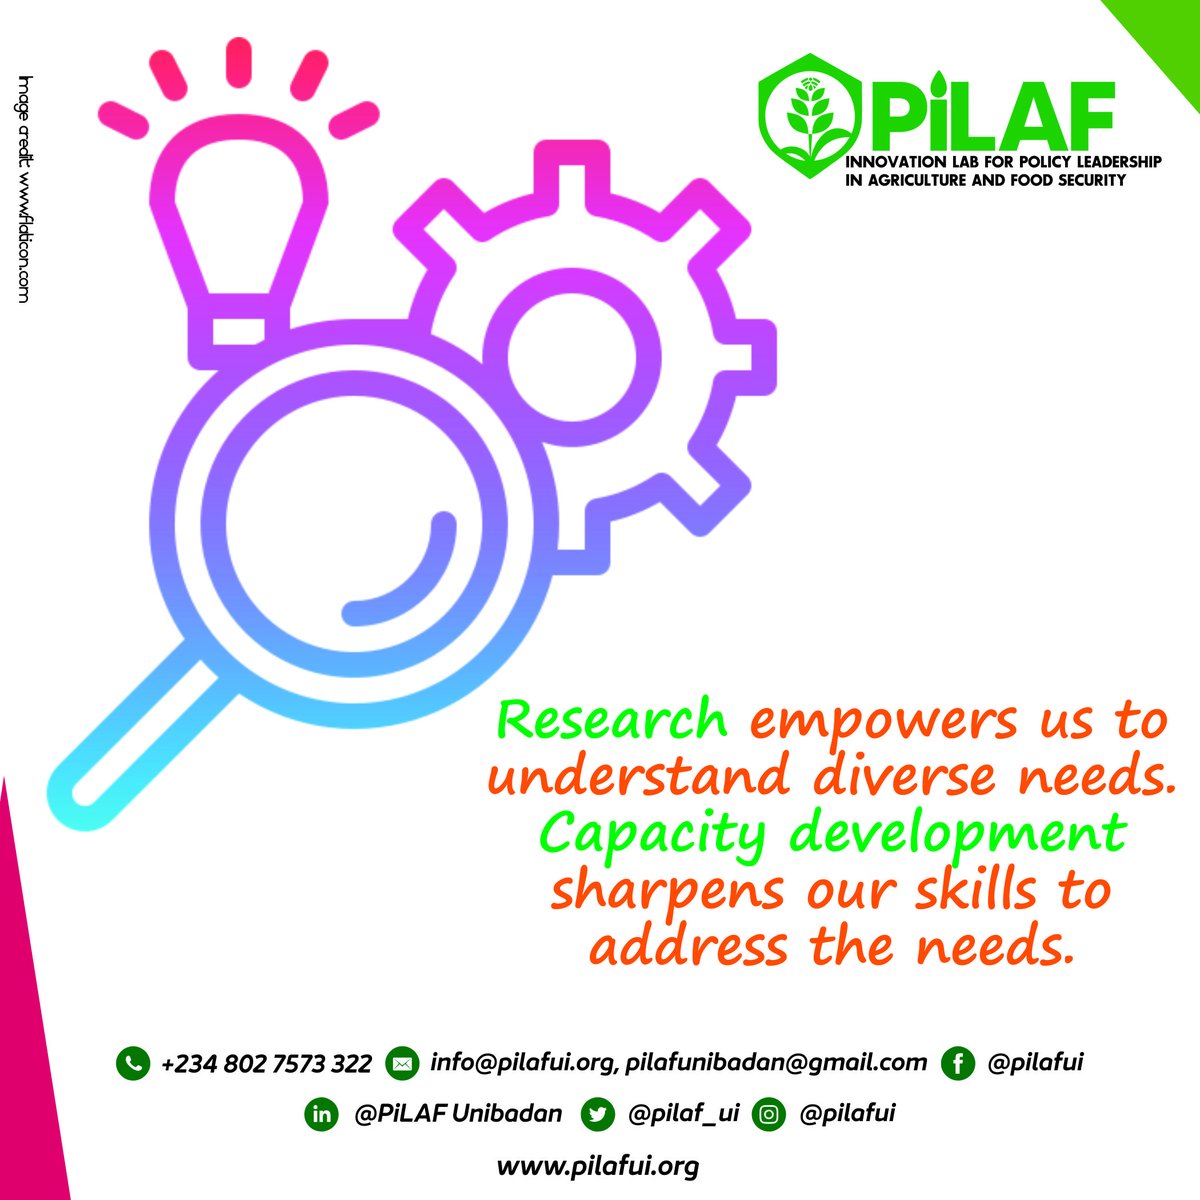 Research empowers us to understand diverse needs. Capacity development sharpens our skills to address the needs. By using these tools to influence policy, we're sowing the seeds of a more inclusive agri-food system.

#research
#capacitydevelopment
#policy
#InclusiveAgriPolicy